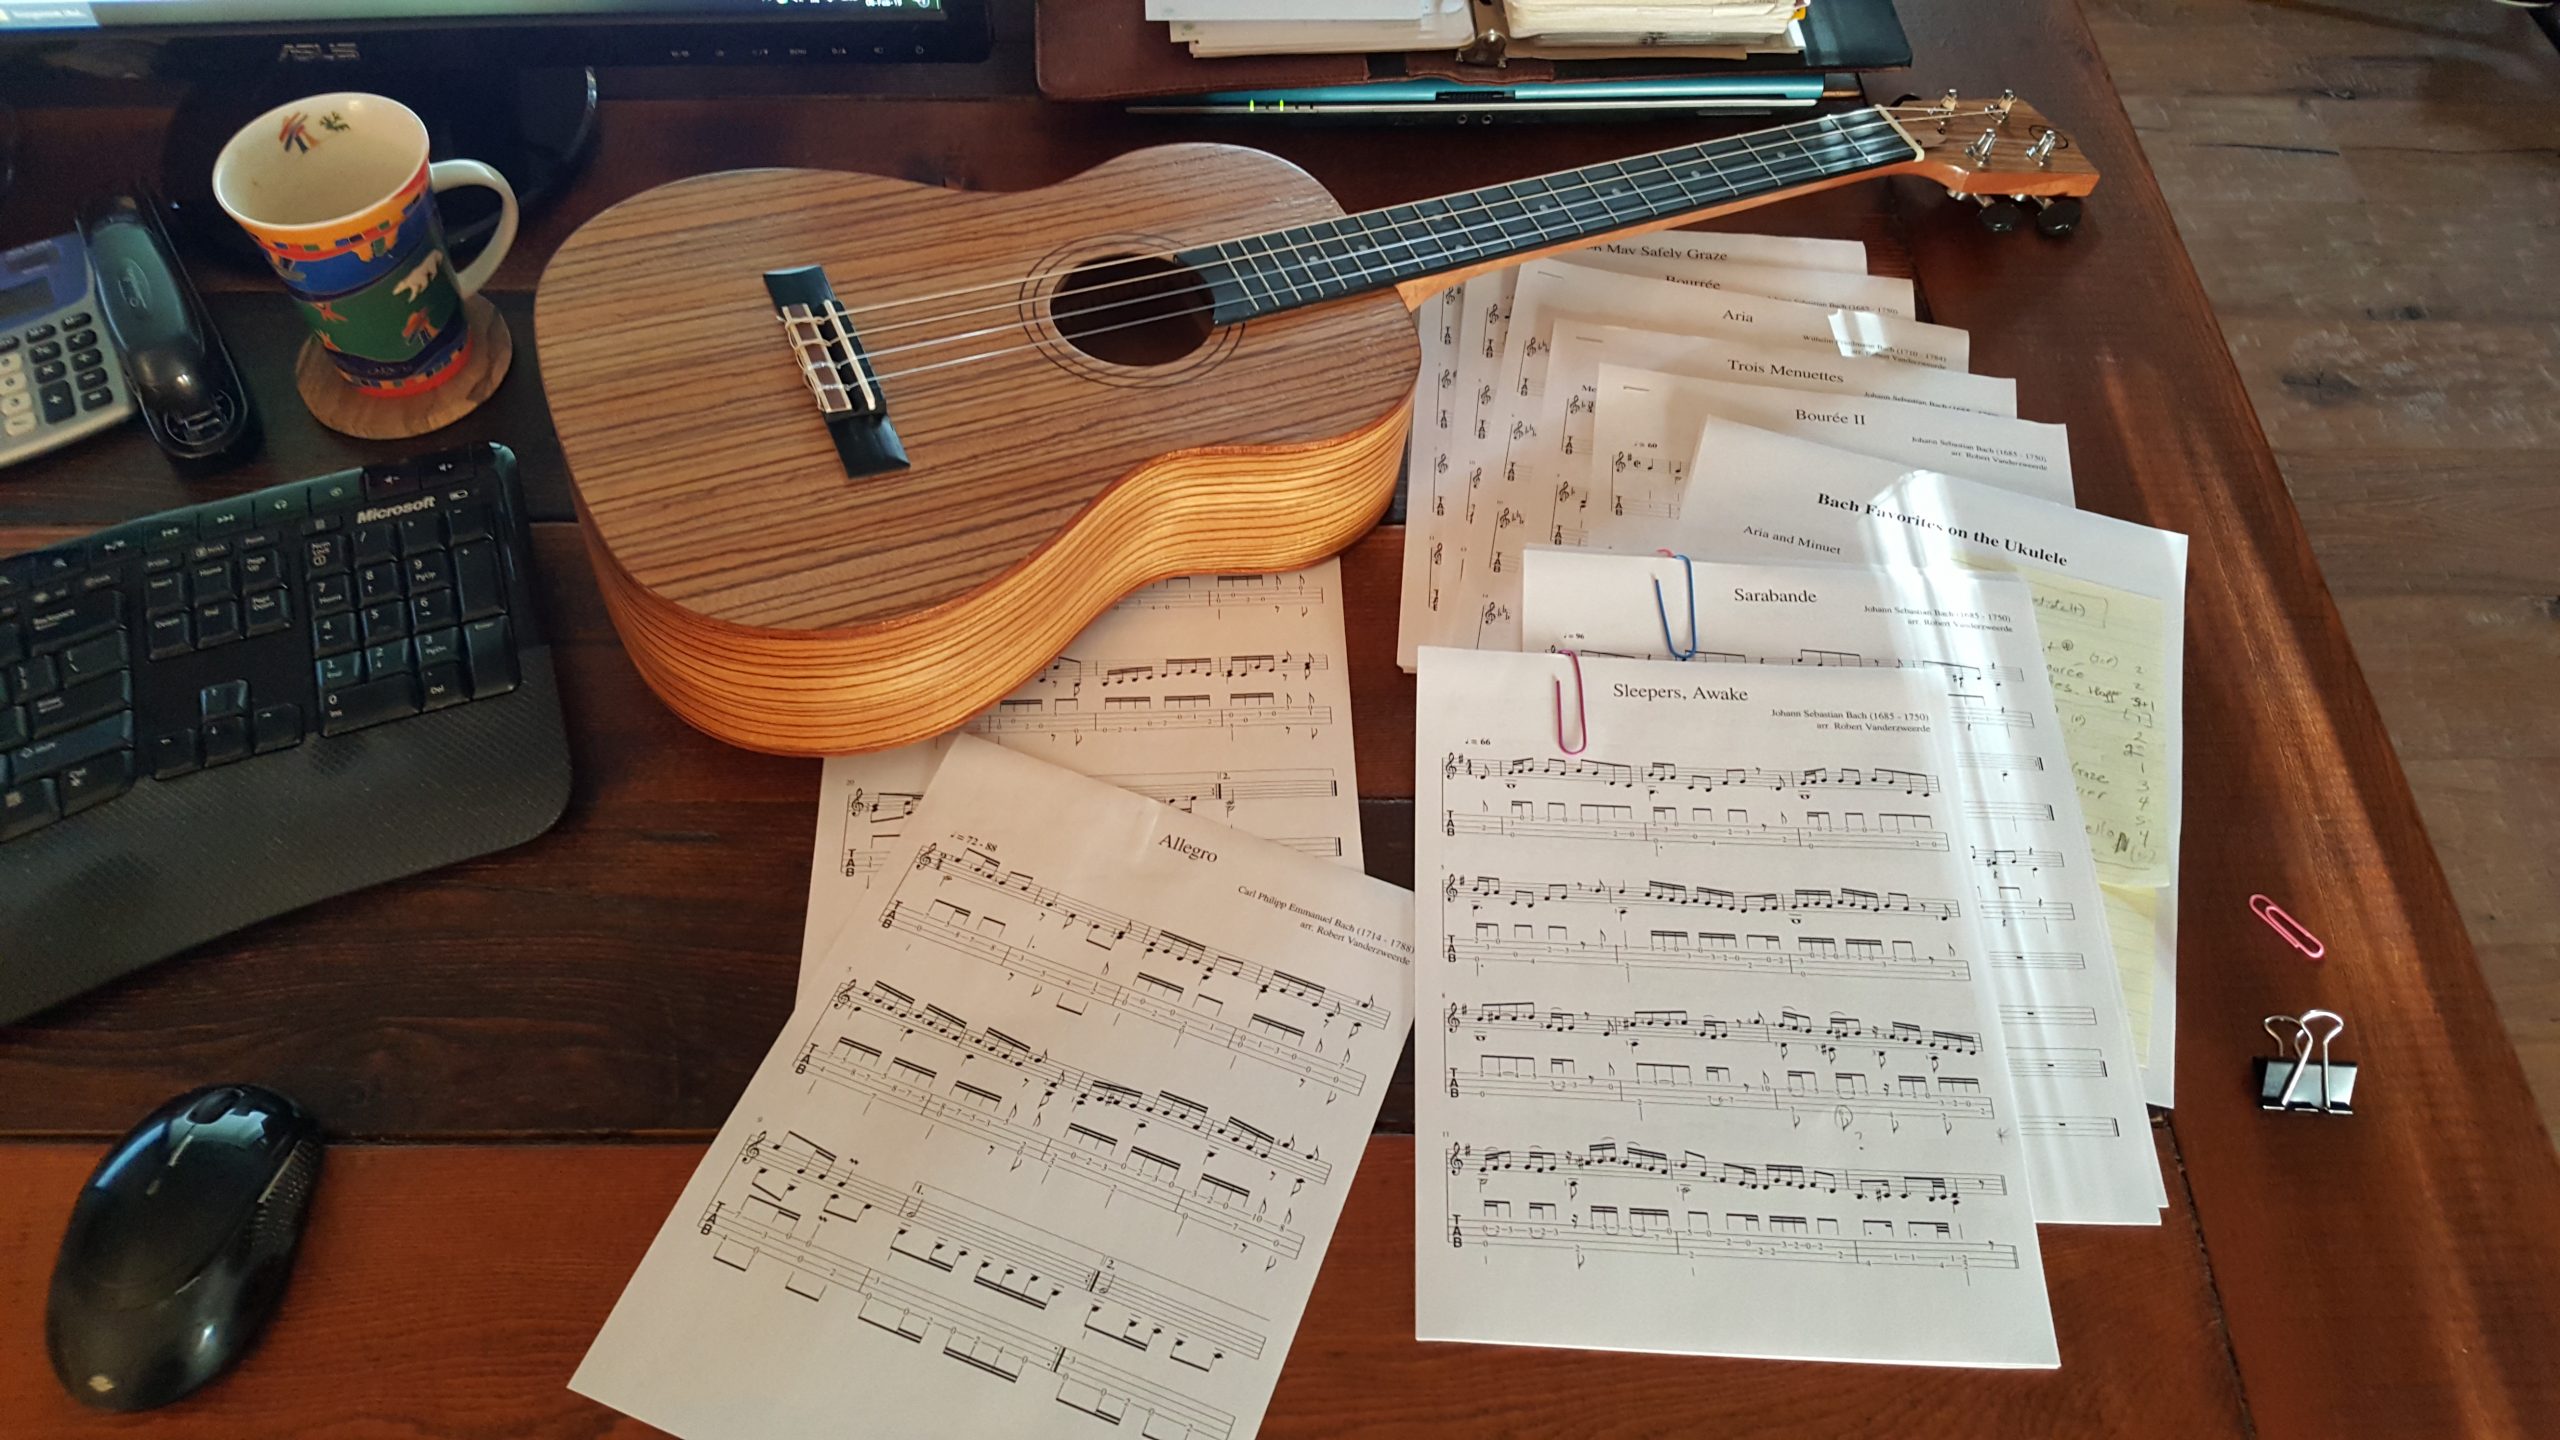 Working on music by Bach and sons